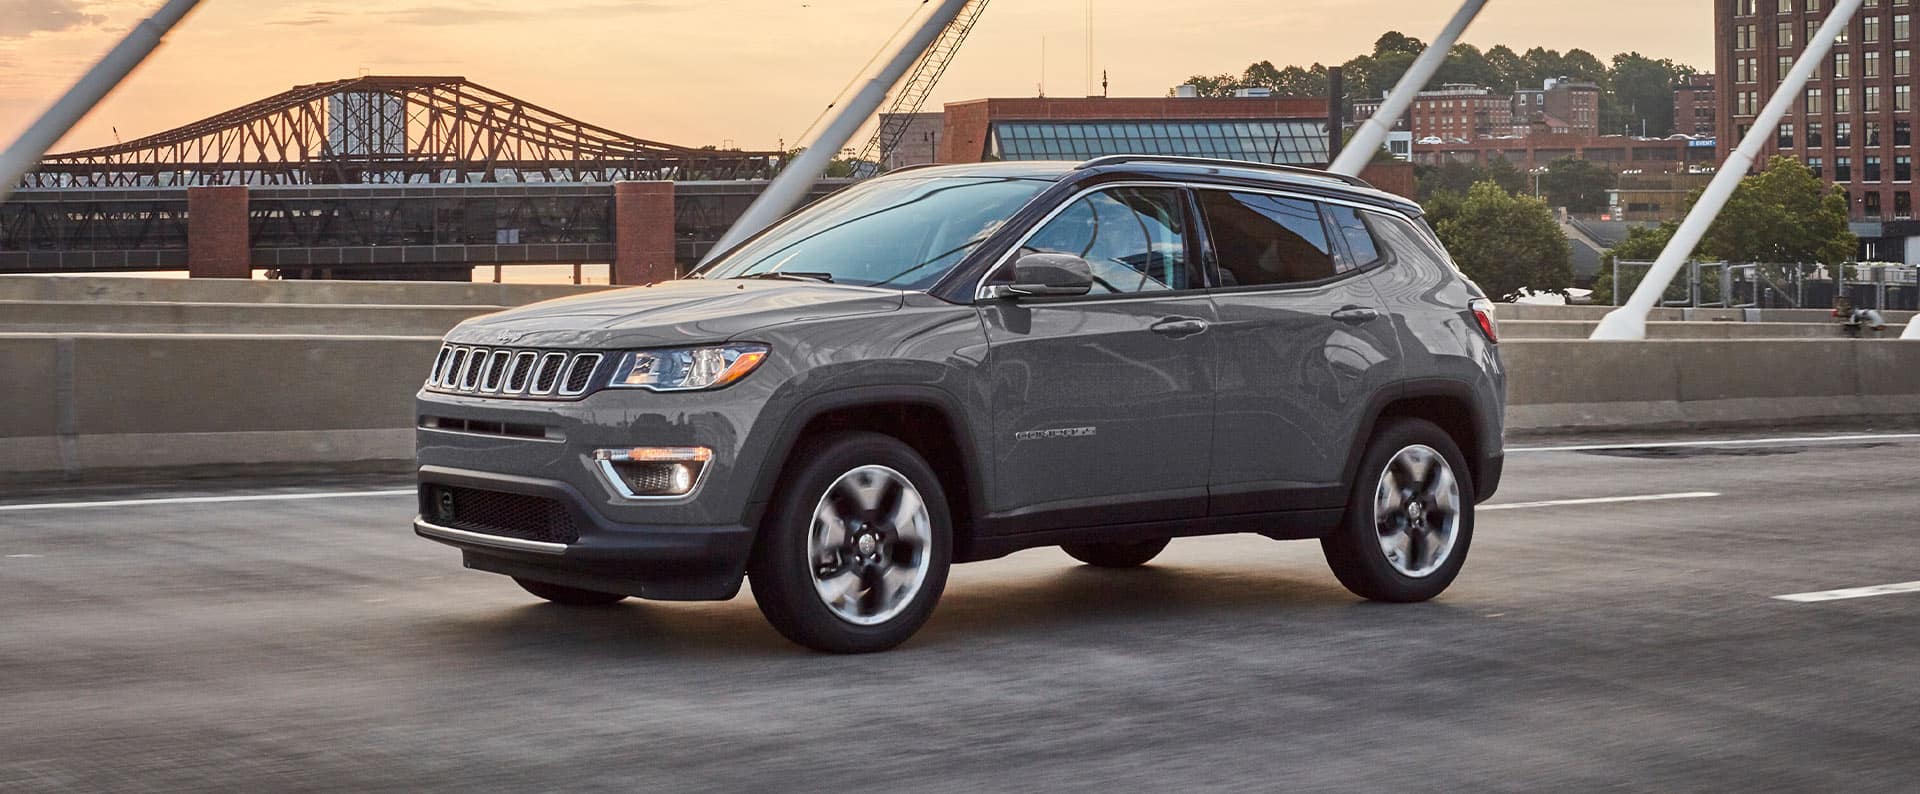 Trim Levels of the 2021 Jeep Compass | Village Jeep